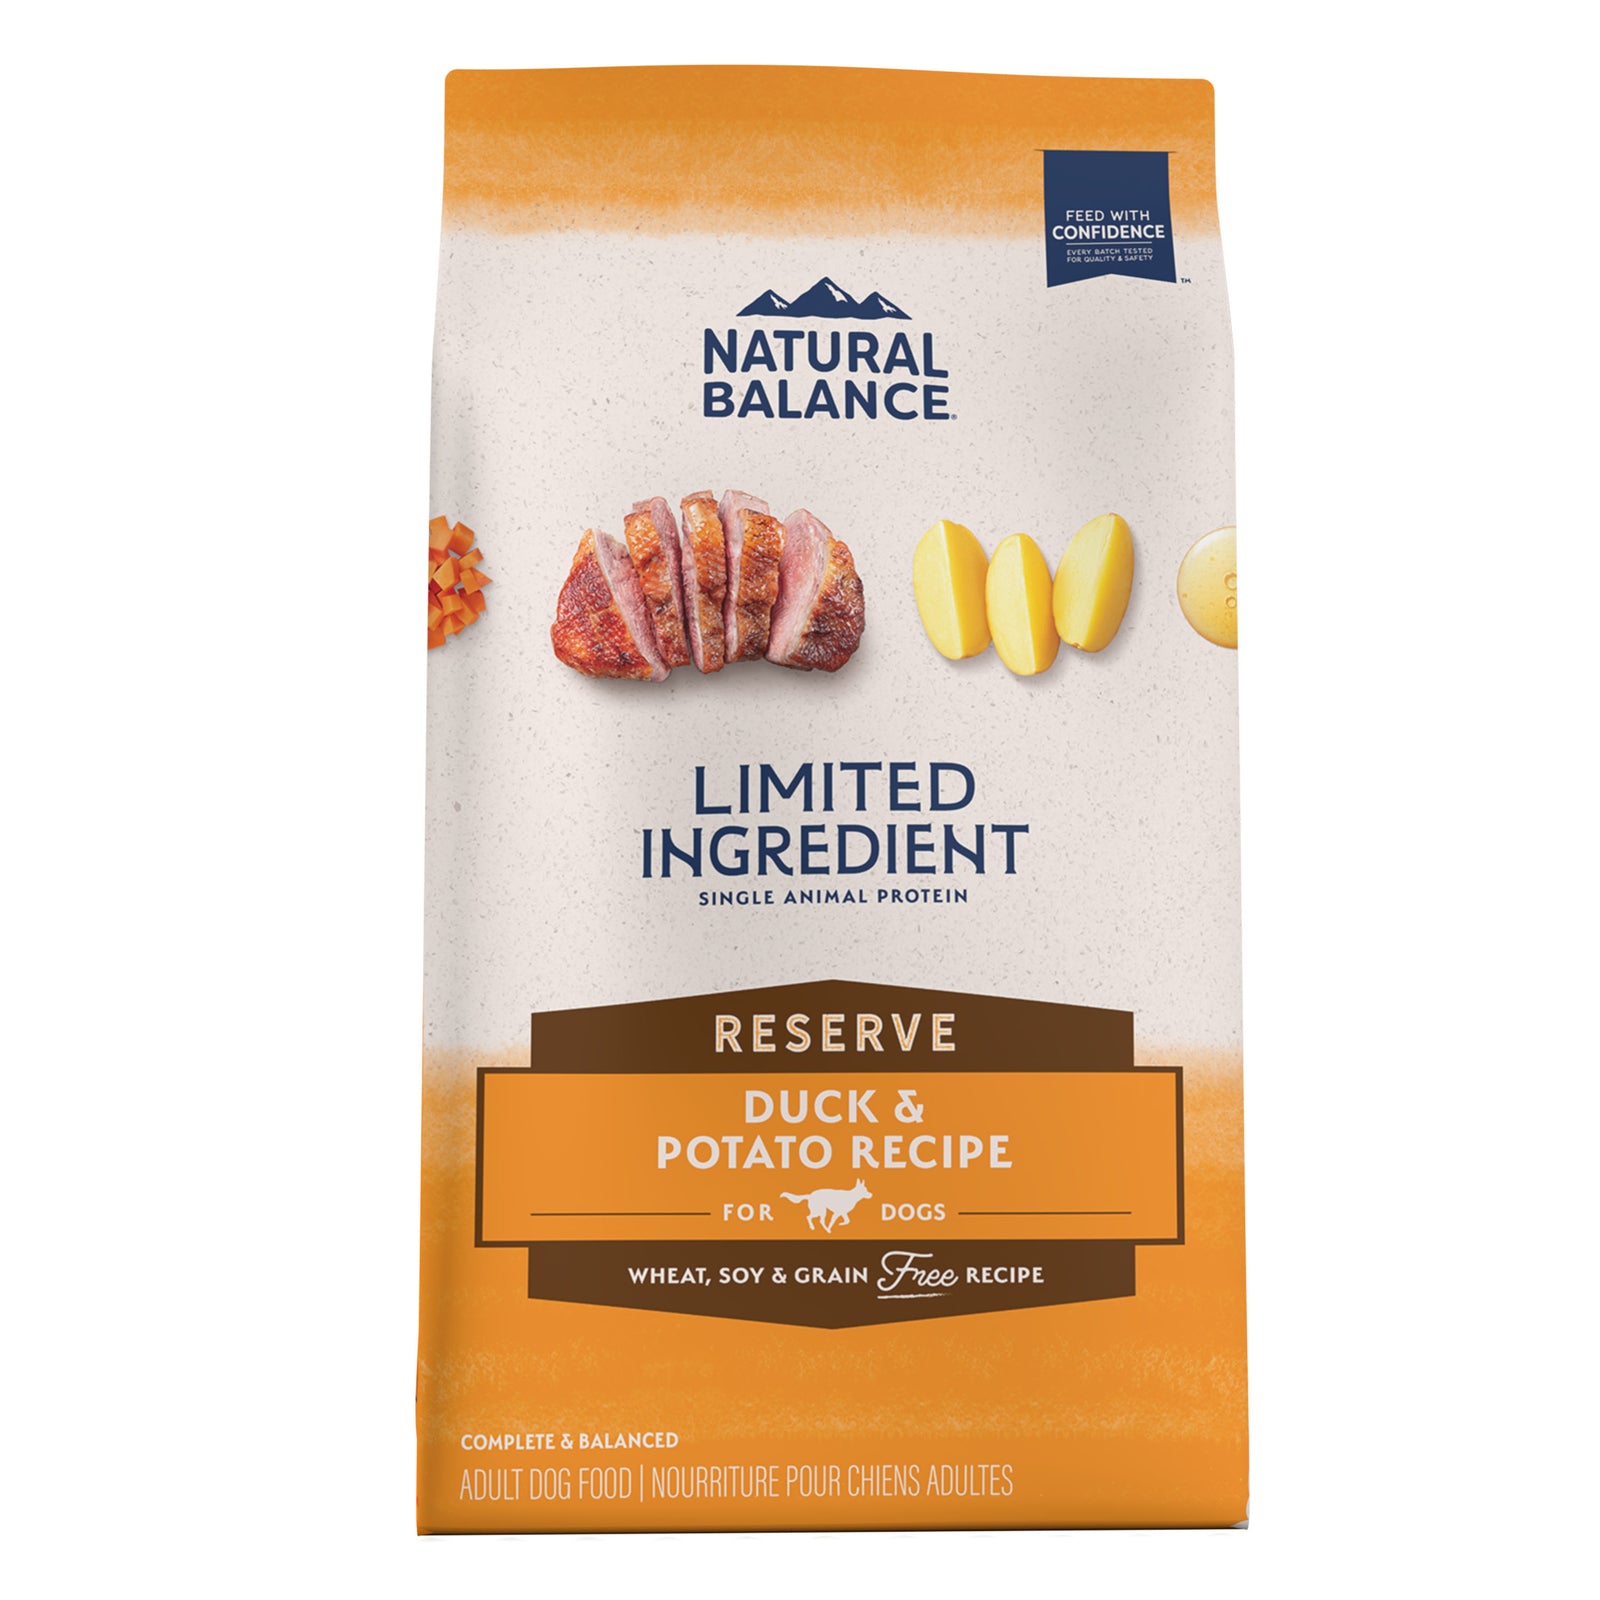 Natural Balance® Limited Ingredient Reserve Grain Free Duck & Potato Recipe Dry Dog Food